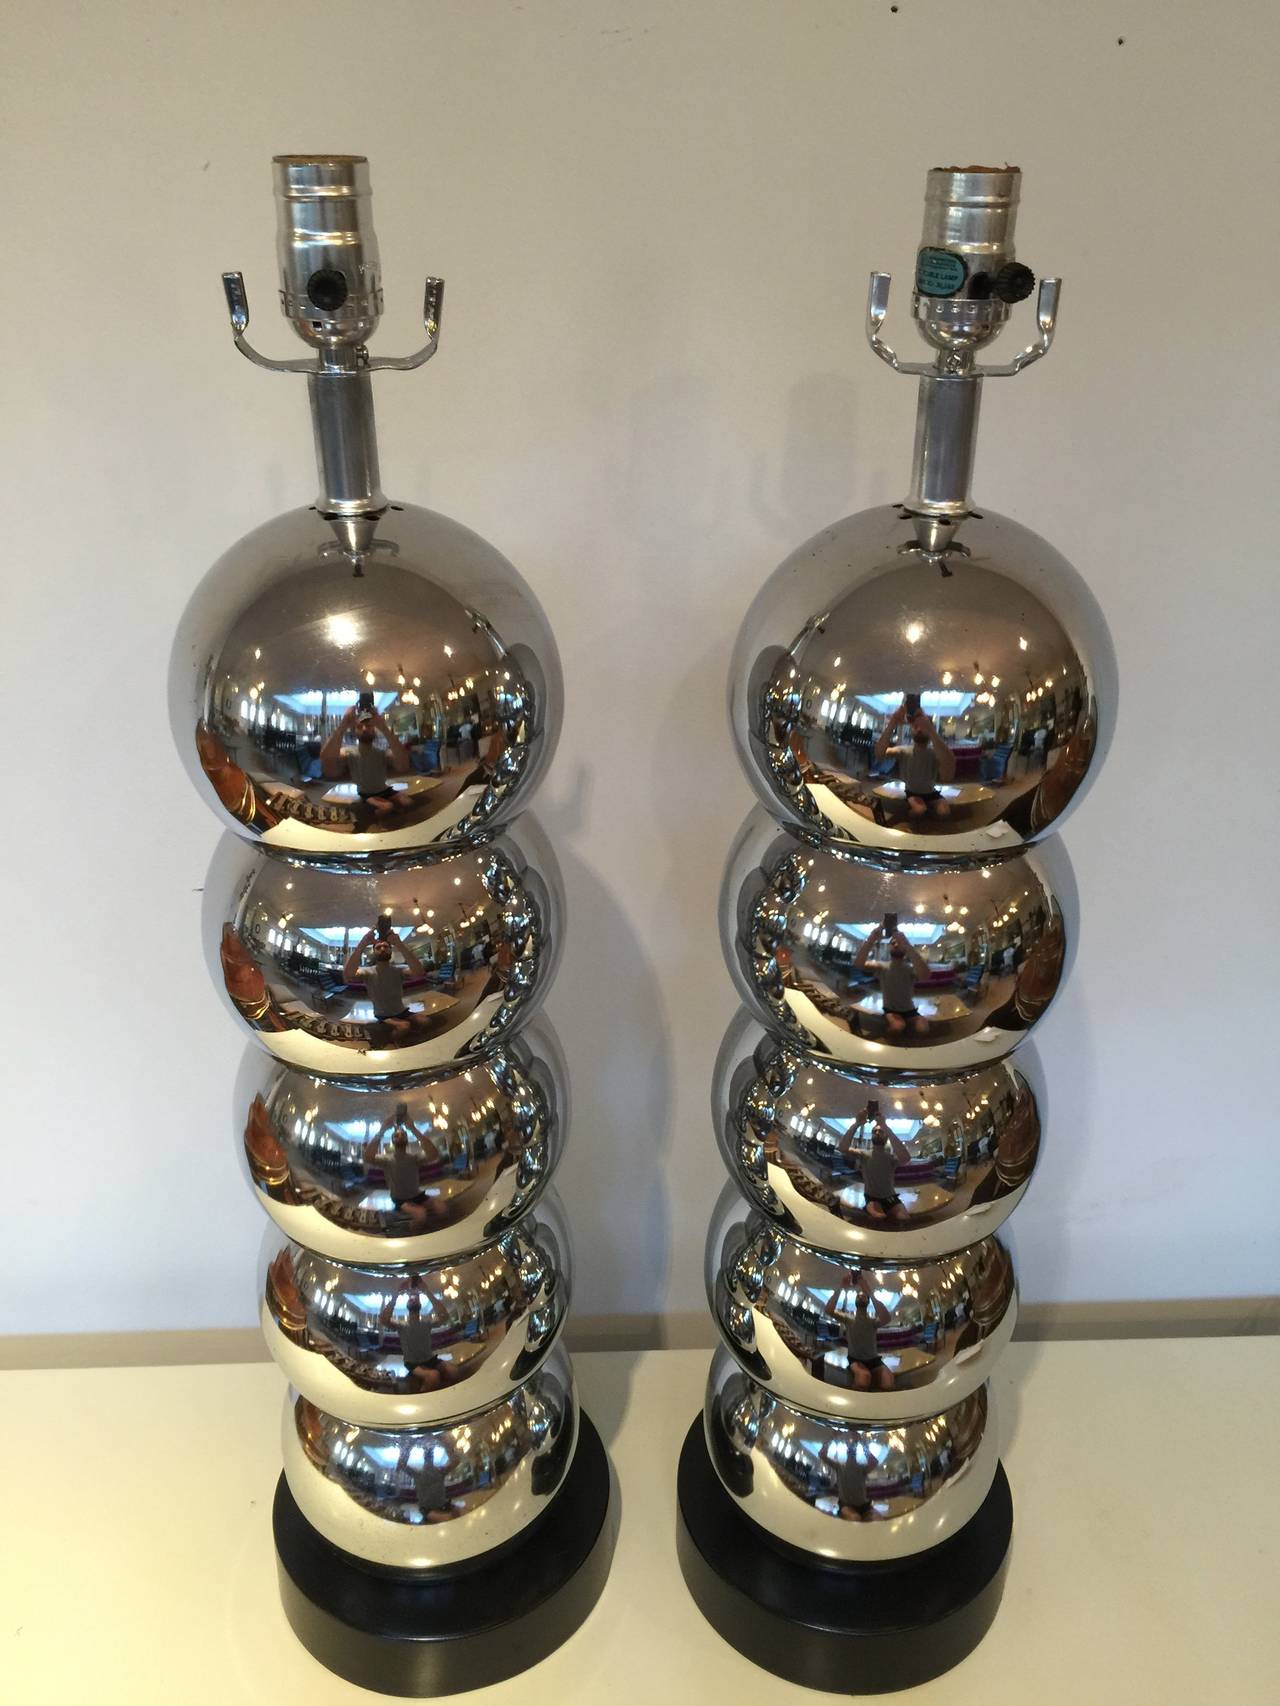 Pair of large chrome ball table lamps by George Kovacs with five stacked spheres and  ebonized wood base. Rewired.